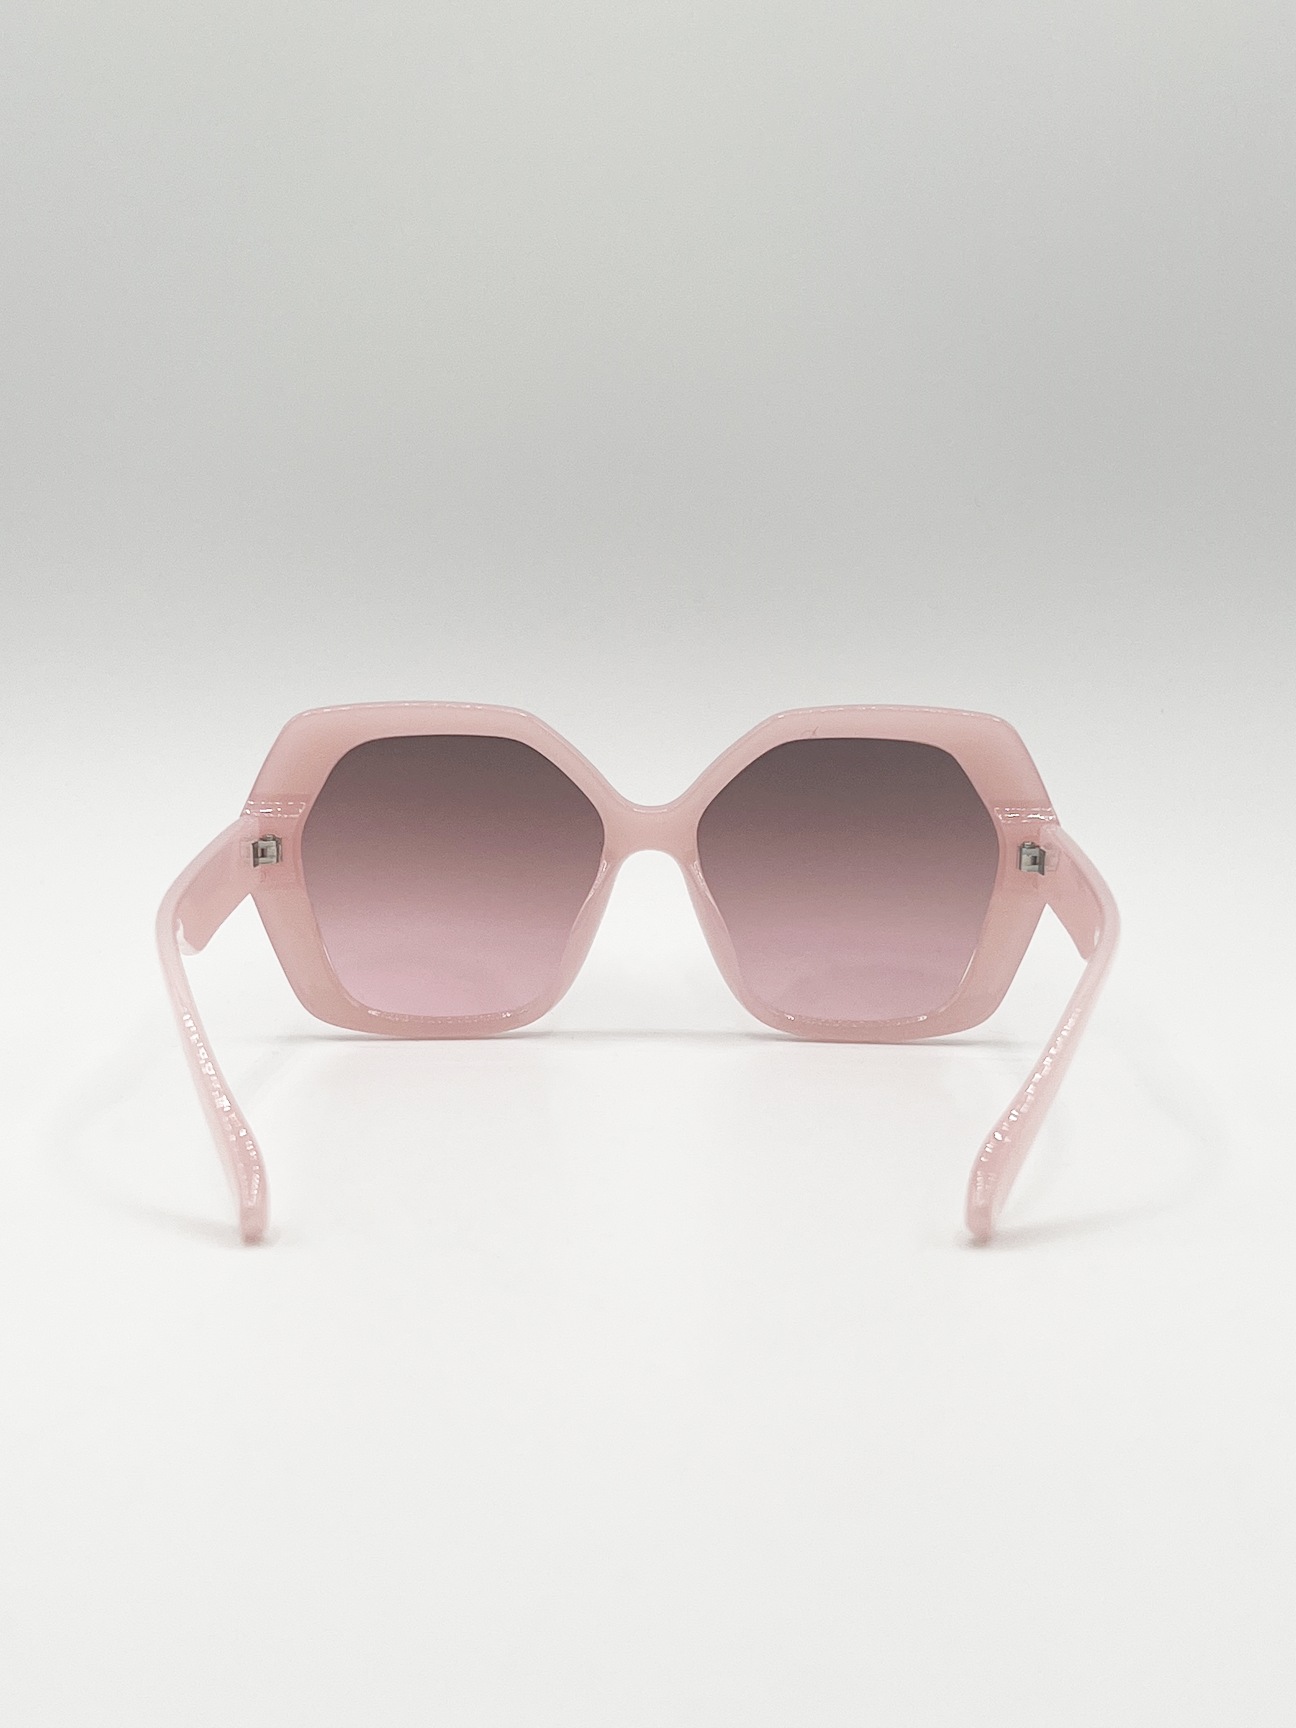 Oversized Rounded Angular Sunglasses in Pink